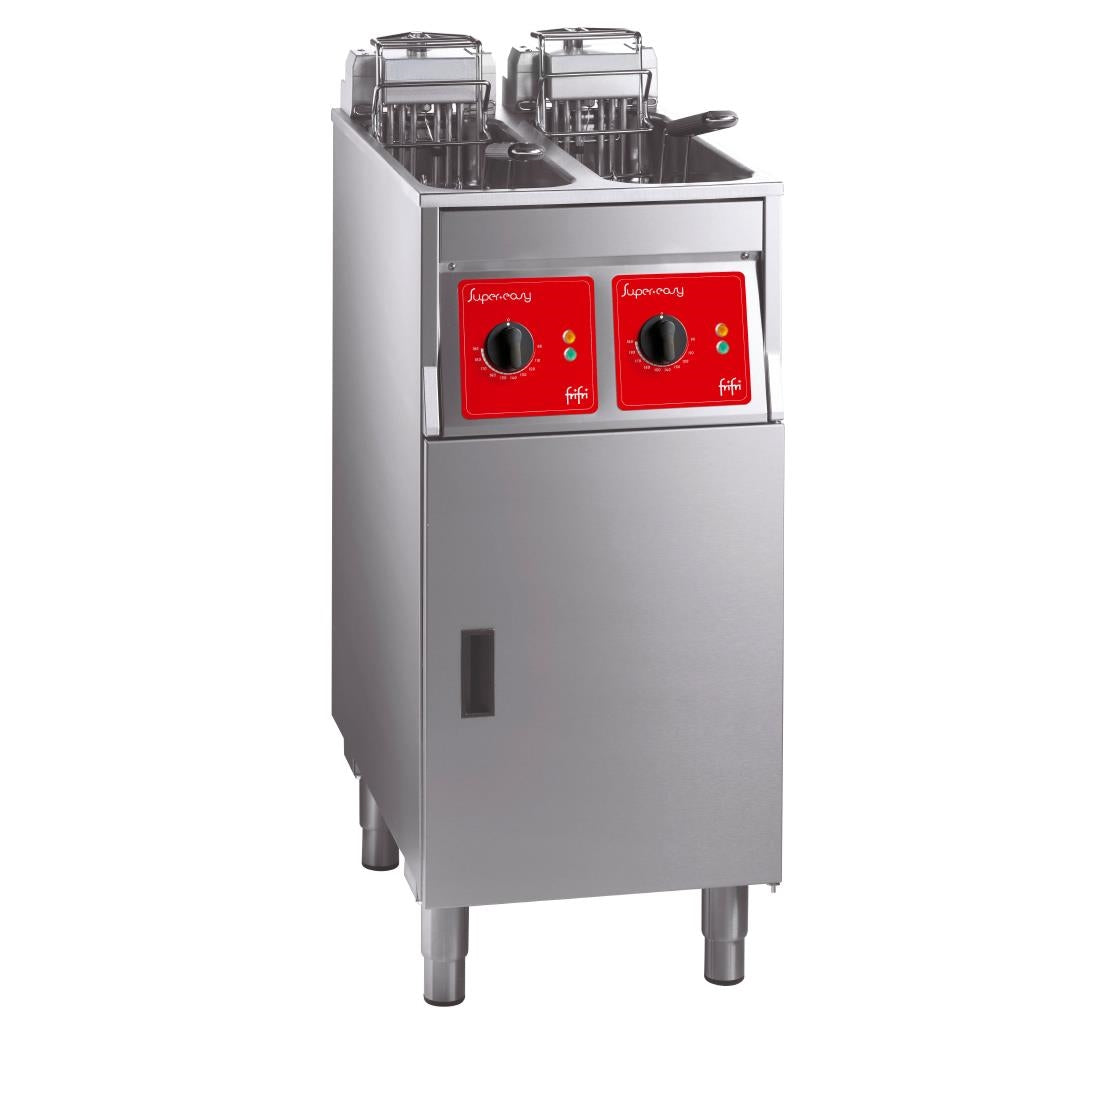 HS063-3PH FriFri Super Easy 422 Electric Free-Standing Twin Tank Fryer with Filtration 2 Baskets 2x 7.5kW - Three Phase